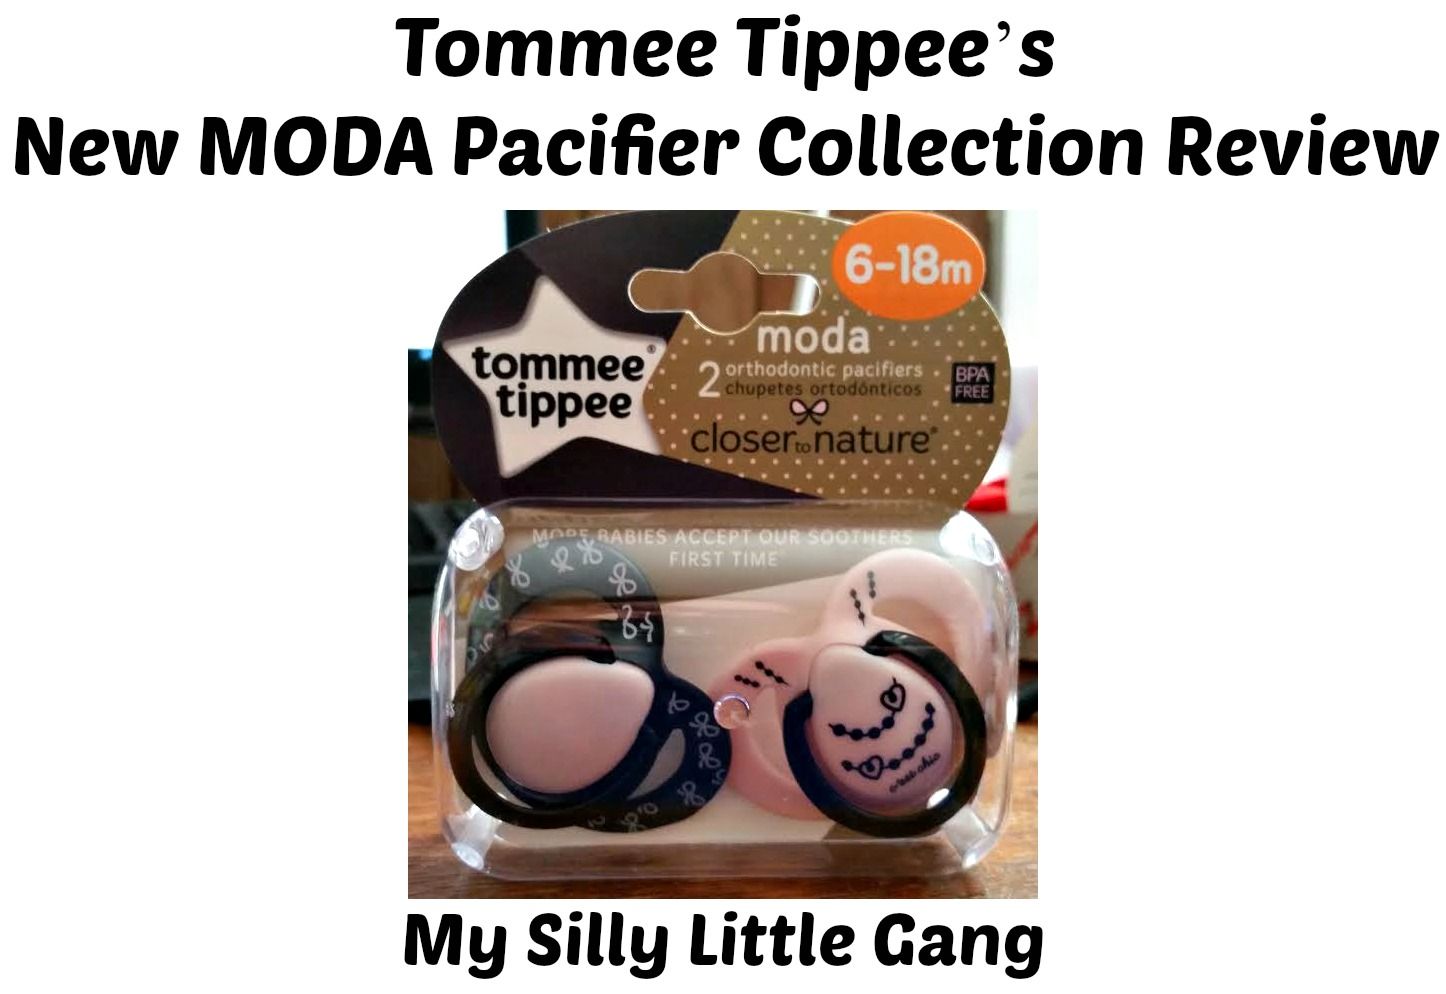 Tommee Tippee's New MODA Pacifiers